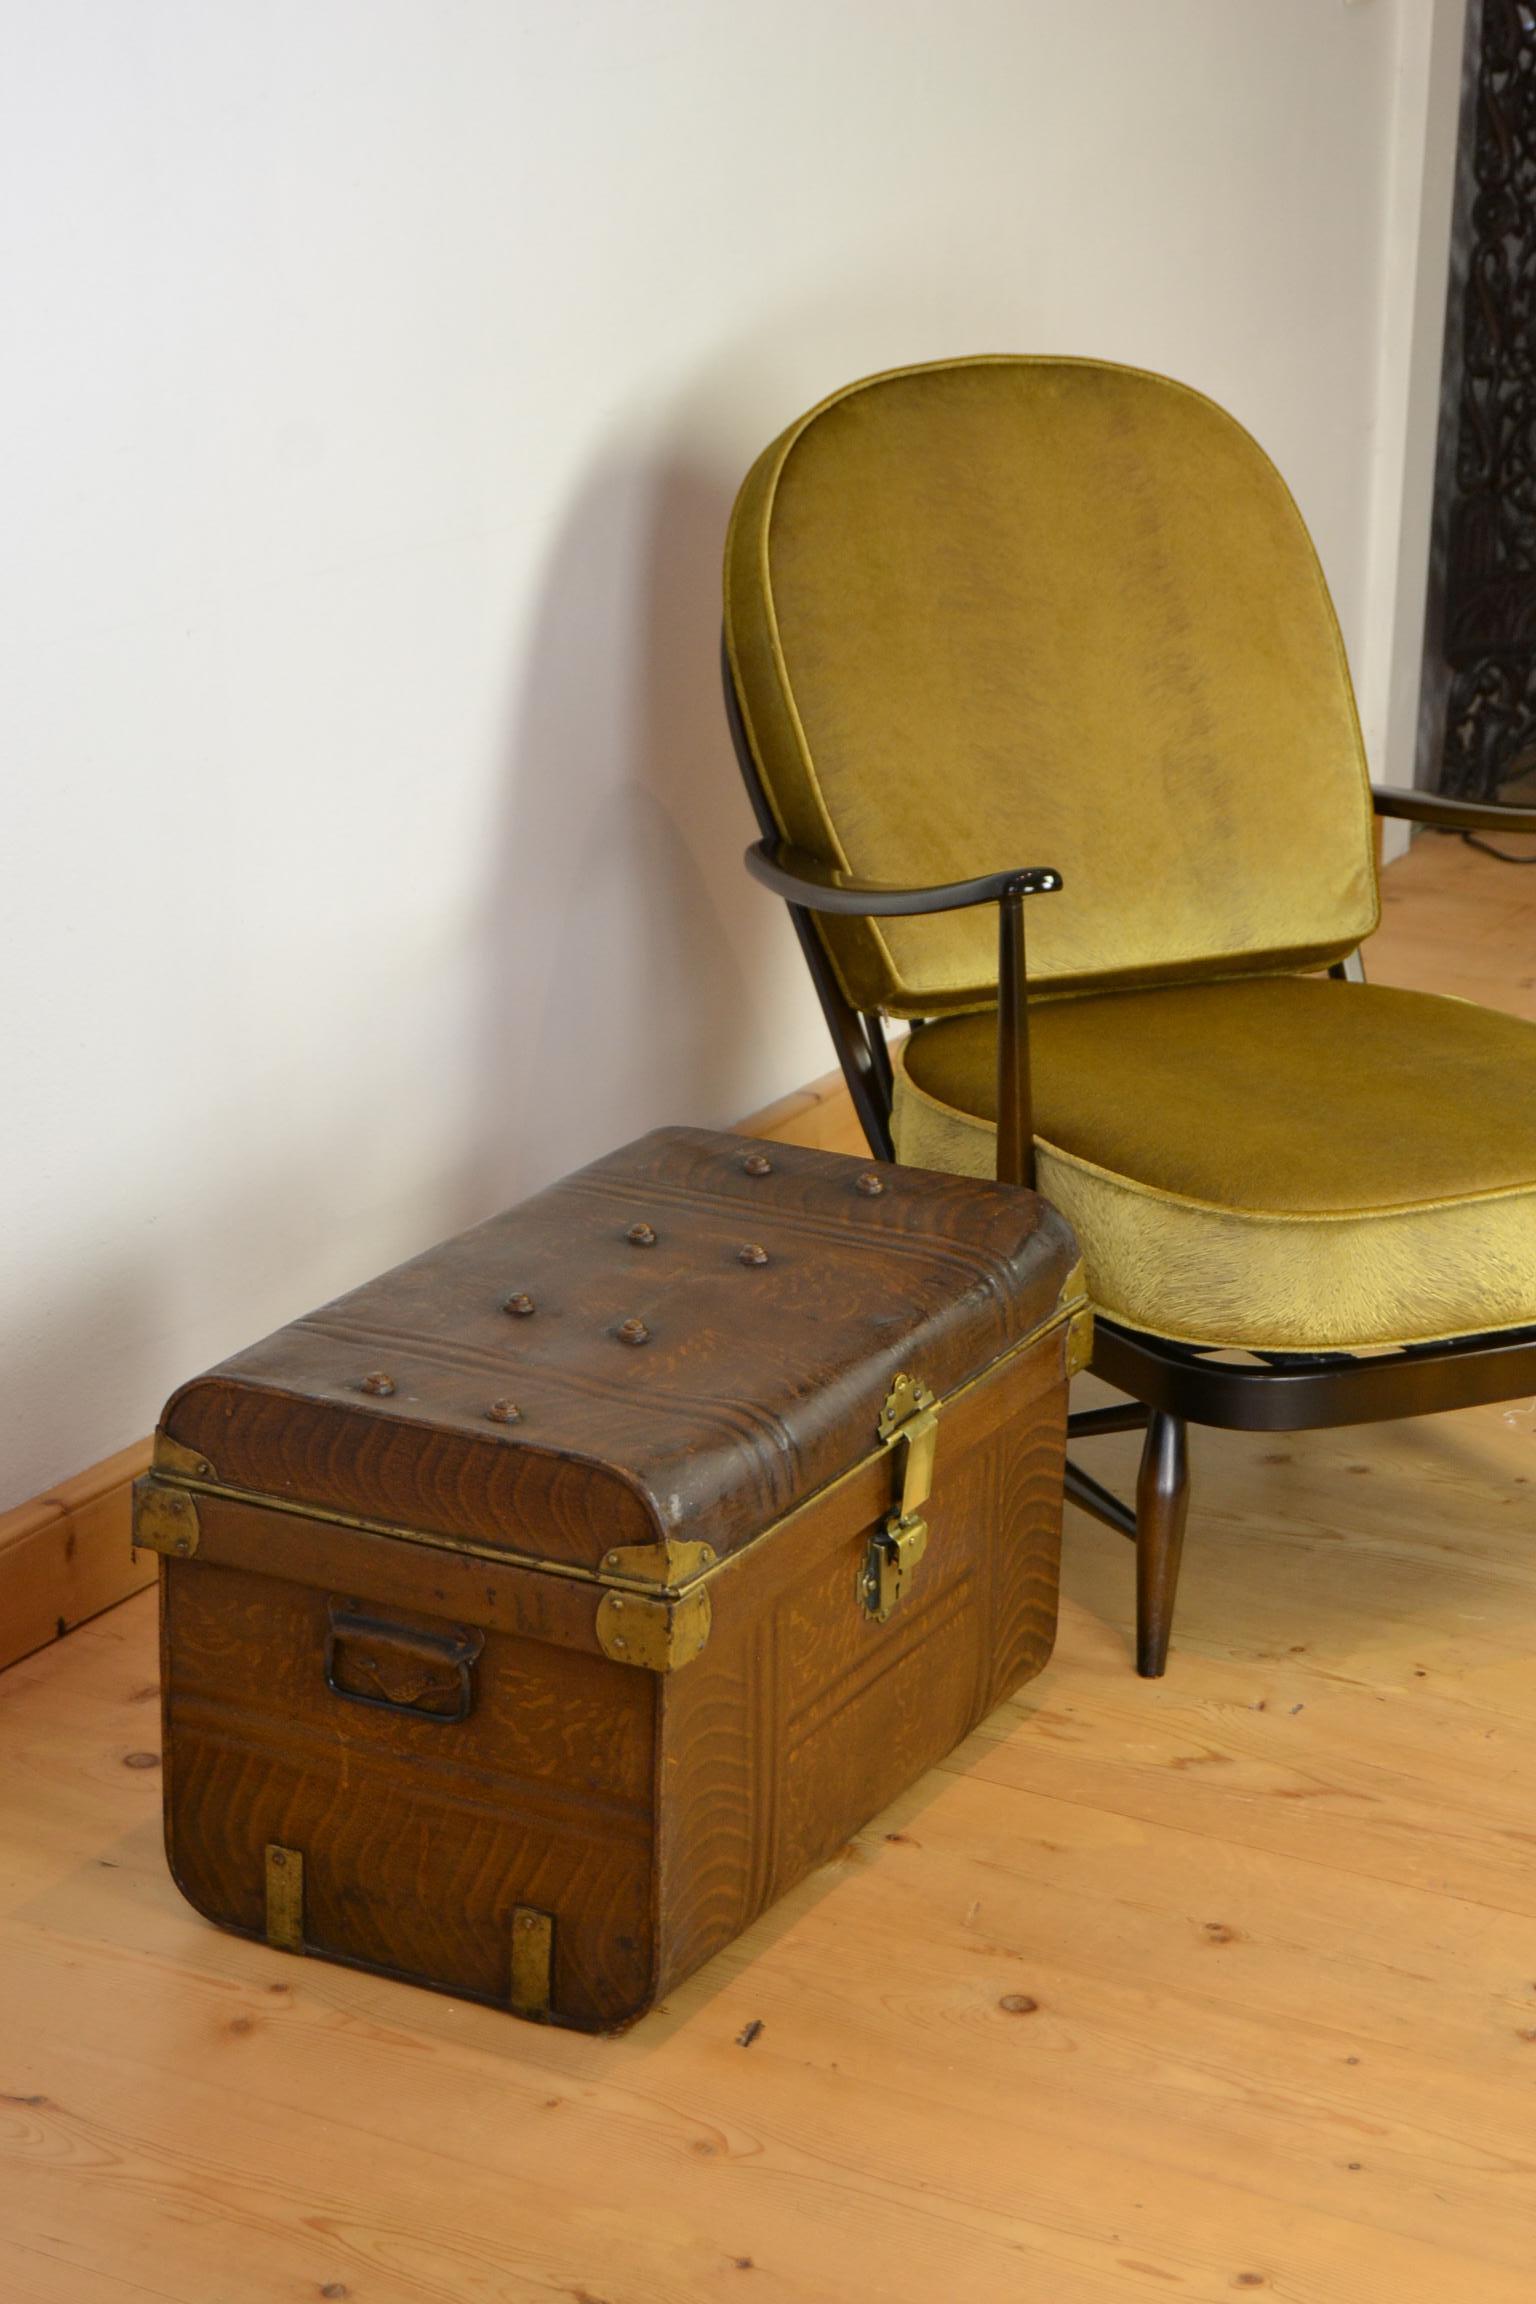 Stylish metal travel trunk with brass lock, corner brackets and details.
This brown hand painted metal trunk or suitcase dates circa 1930s.
It' an English antique metal storage box or travelling trunk with blue interior.
This floor trunk or steel